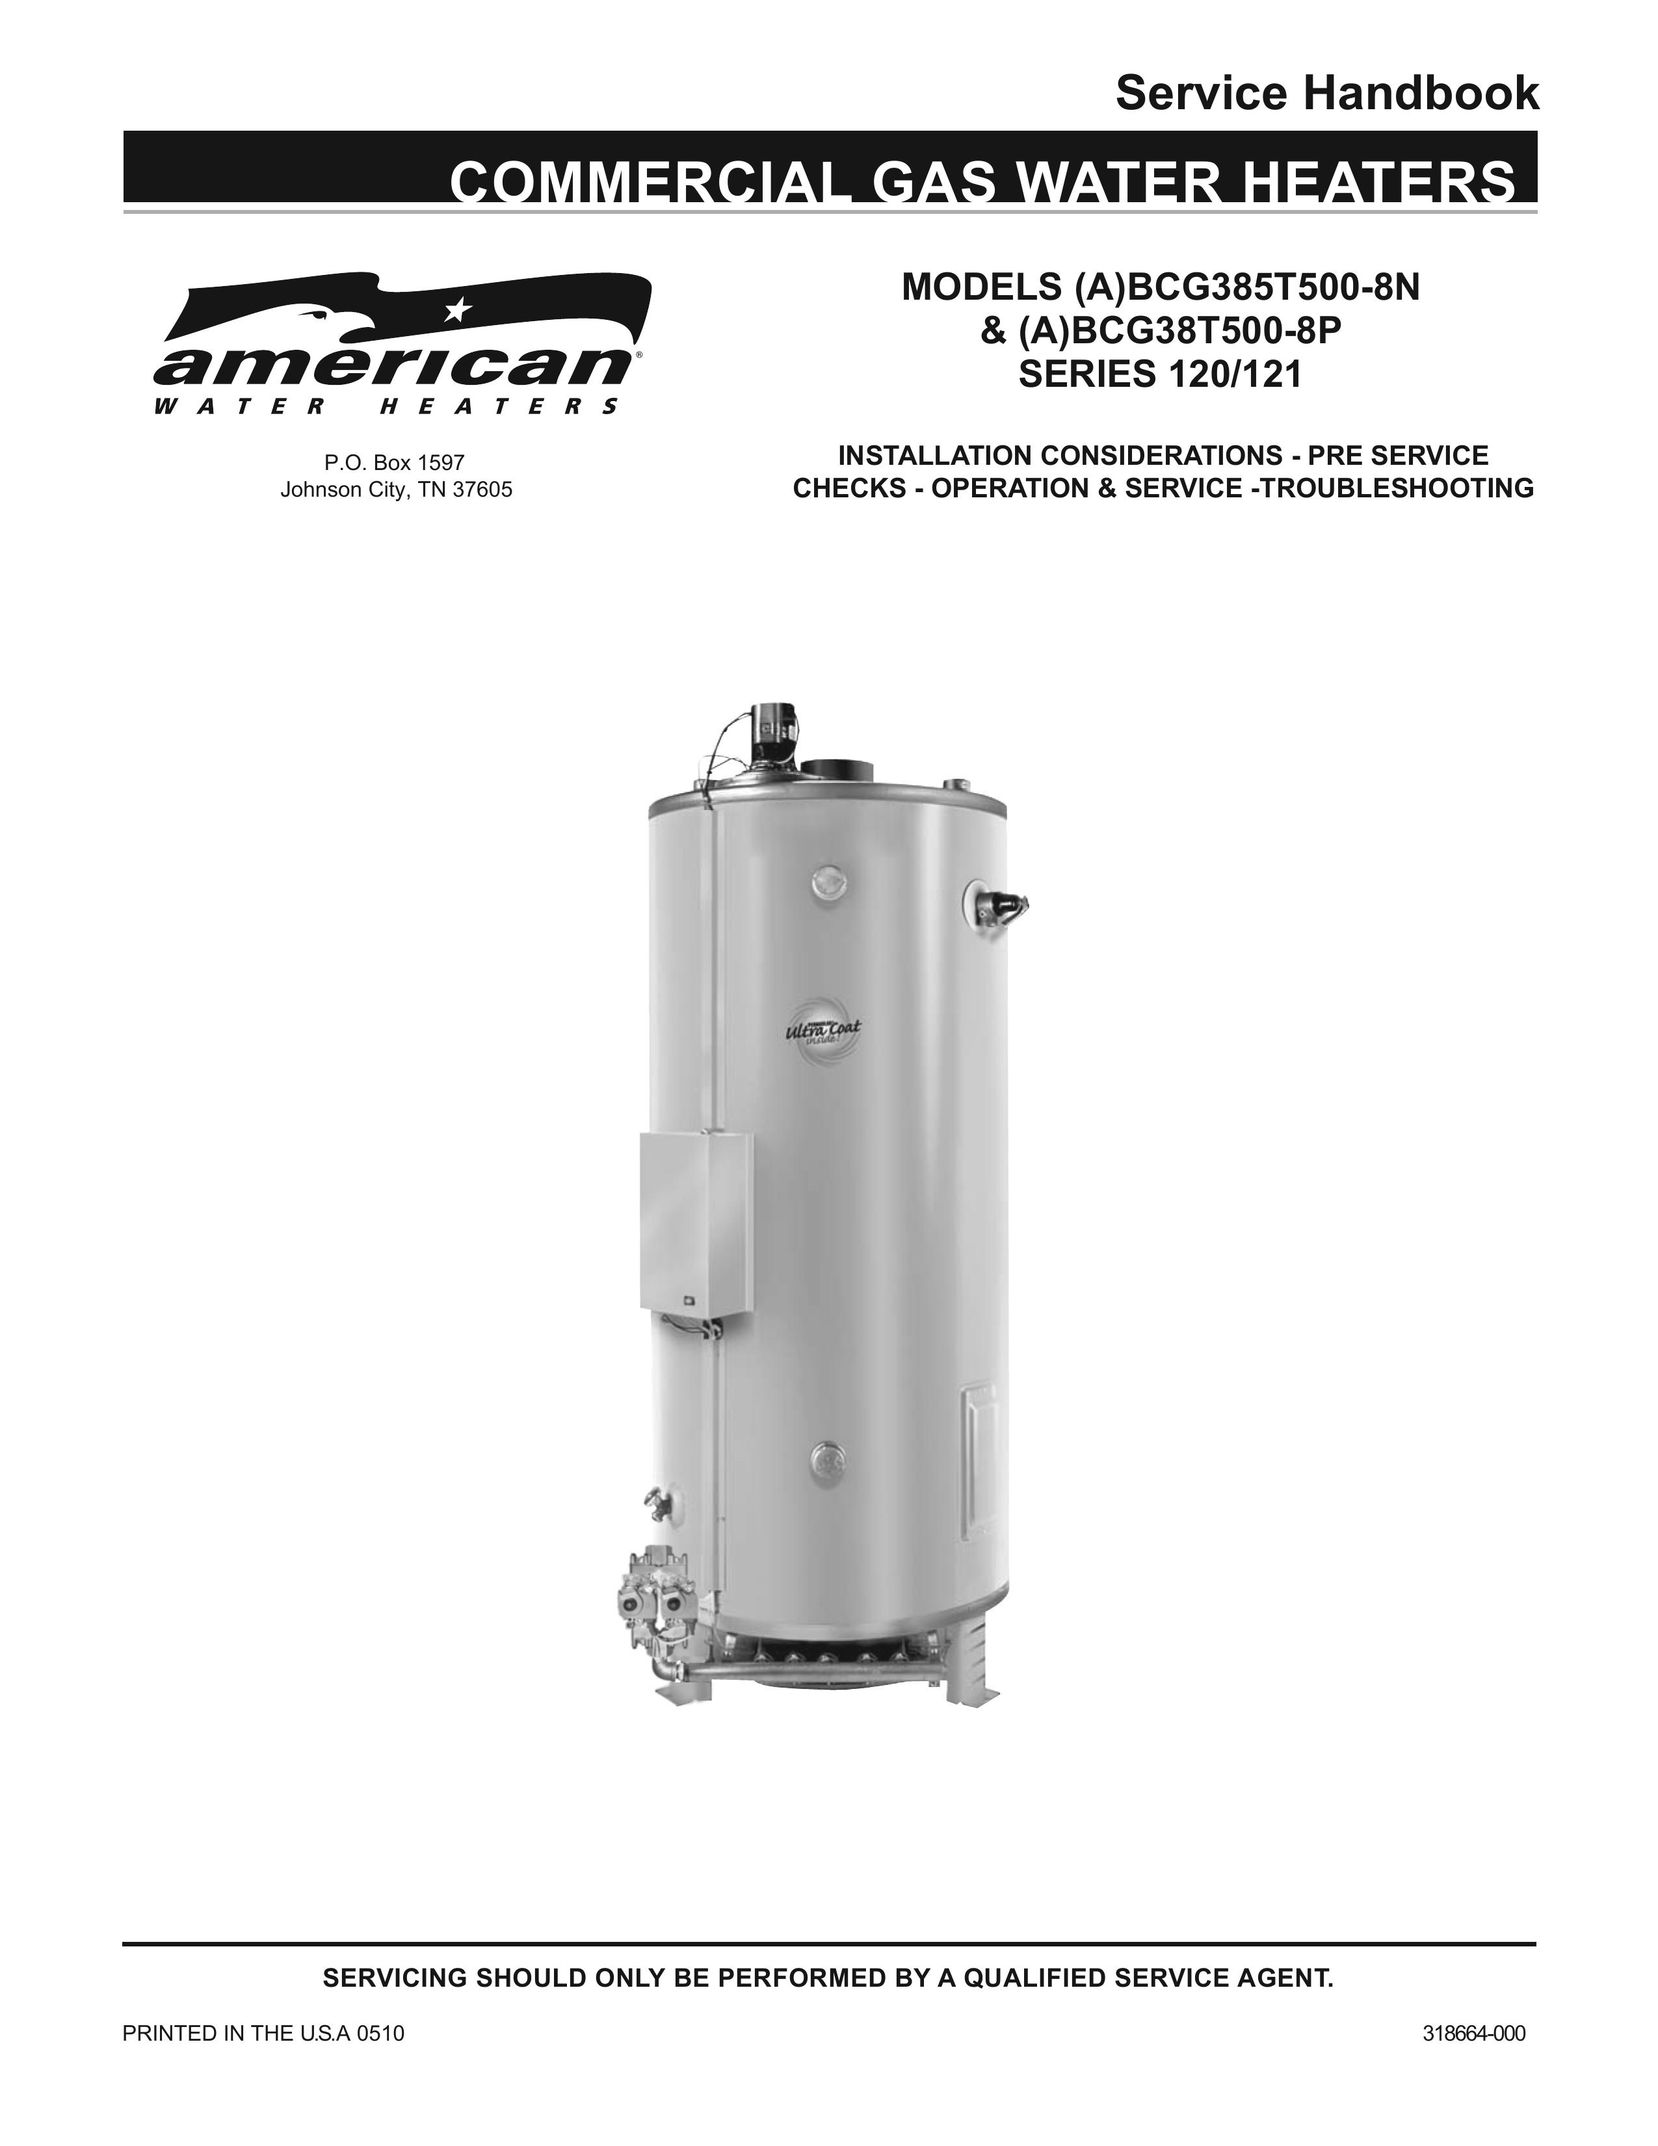 American Water Heater (A)BCG385T500-8N Water Heater User Manual